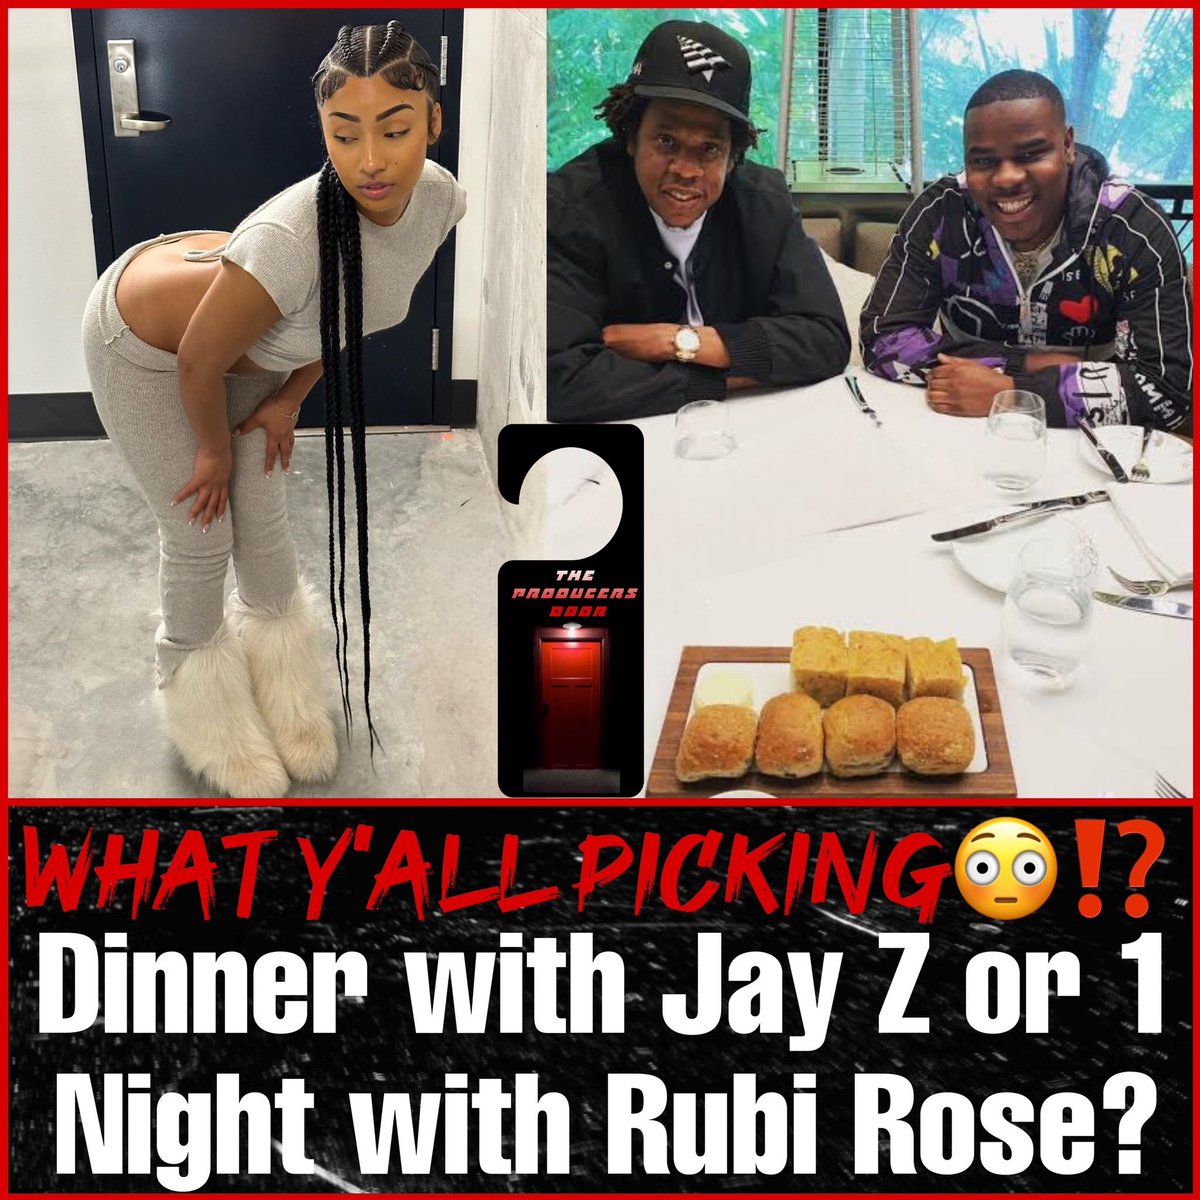 Dinner with Jay Z or 1 Night with Rubi Rose??

#TheProducersDoor #HipHop #hiphopnews #hiphopculture #music #blog #blogger #bloggerstyle #music #musician #unsignedartist #unsignedhype #unsignedrapper #explorepage #explore